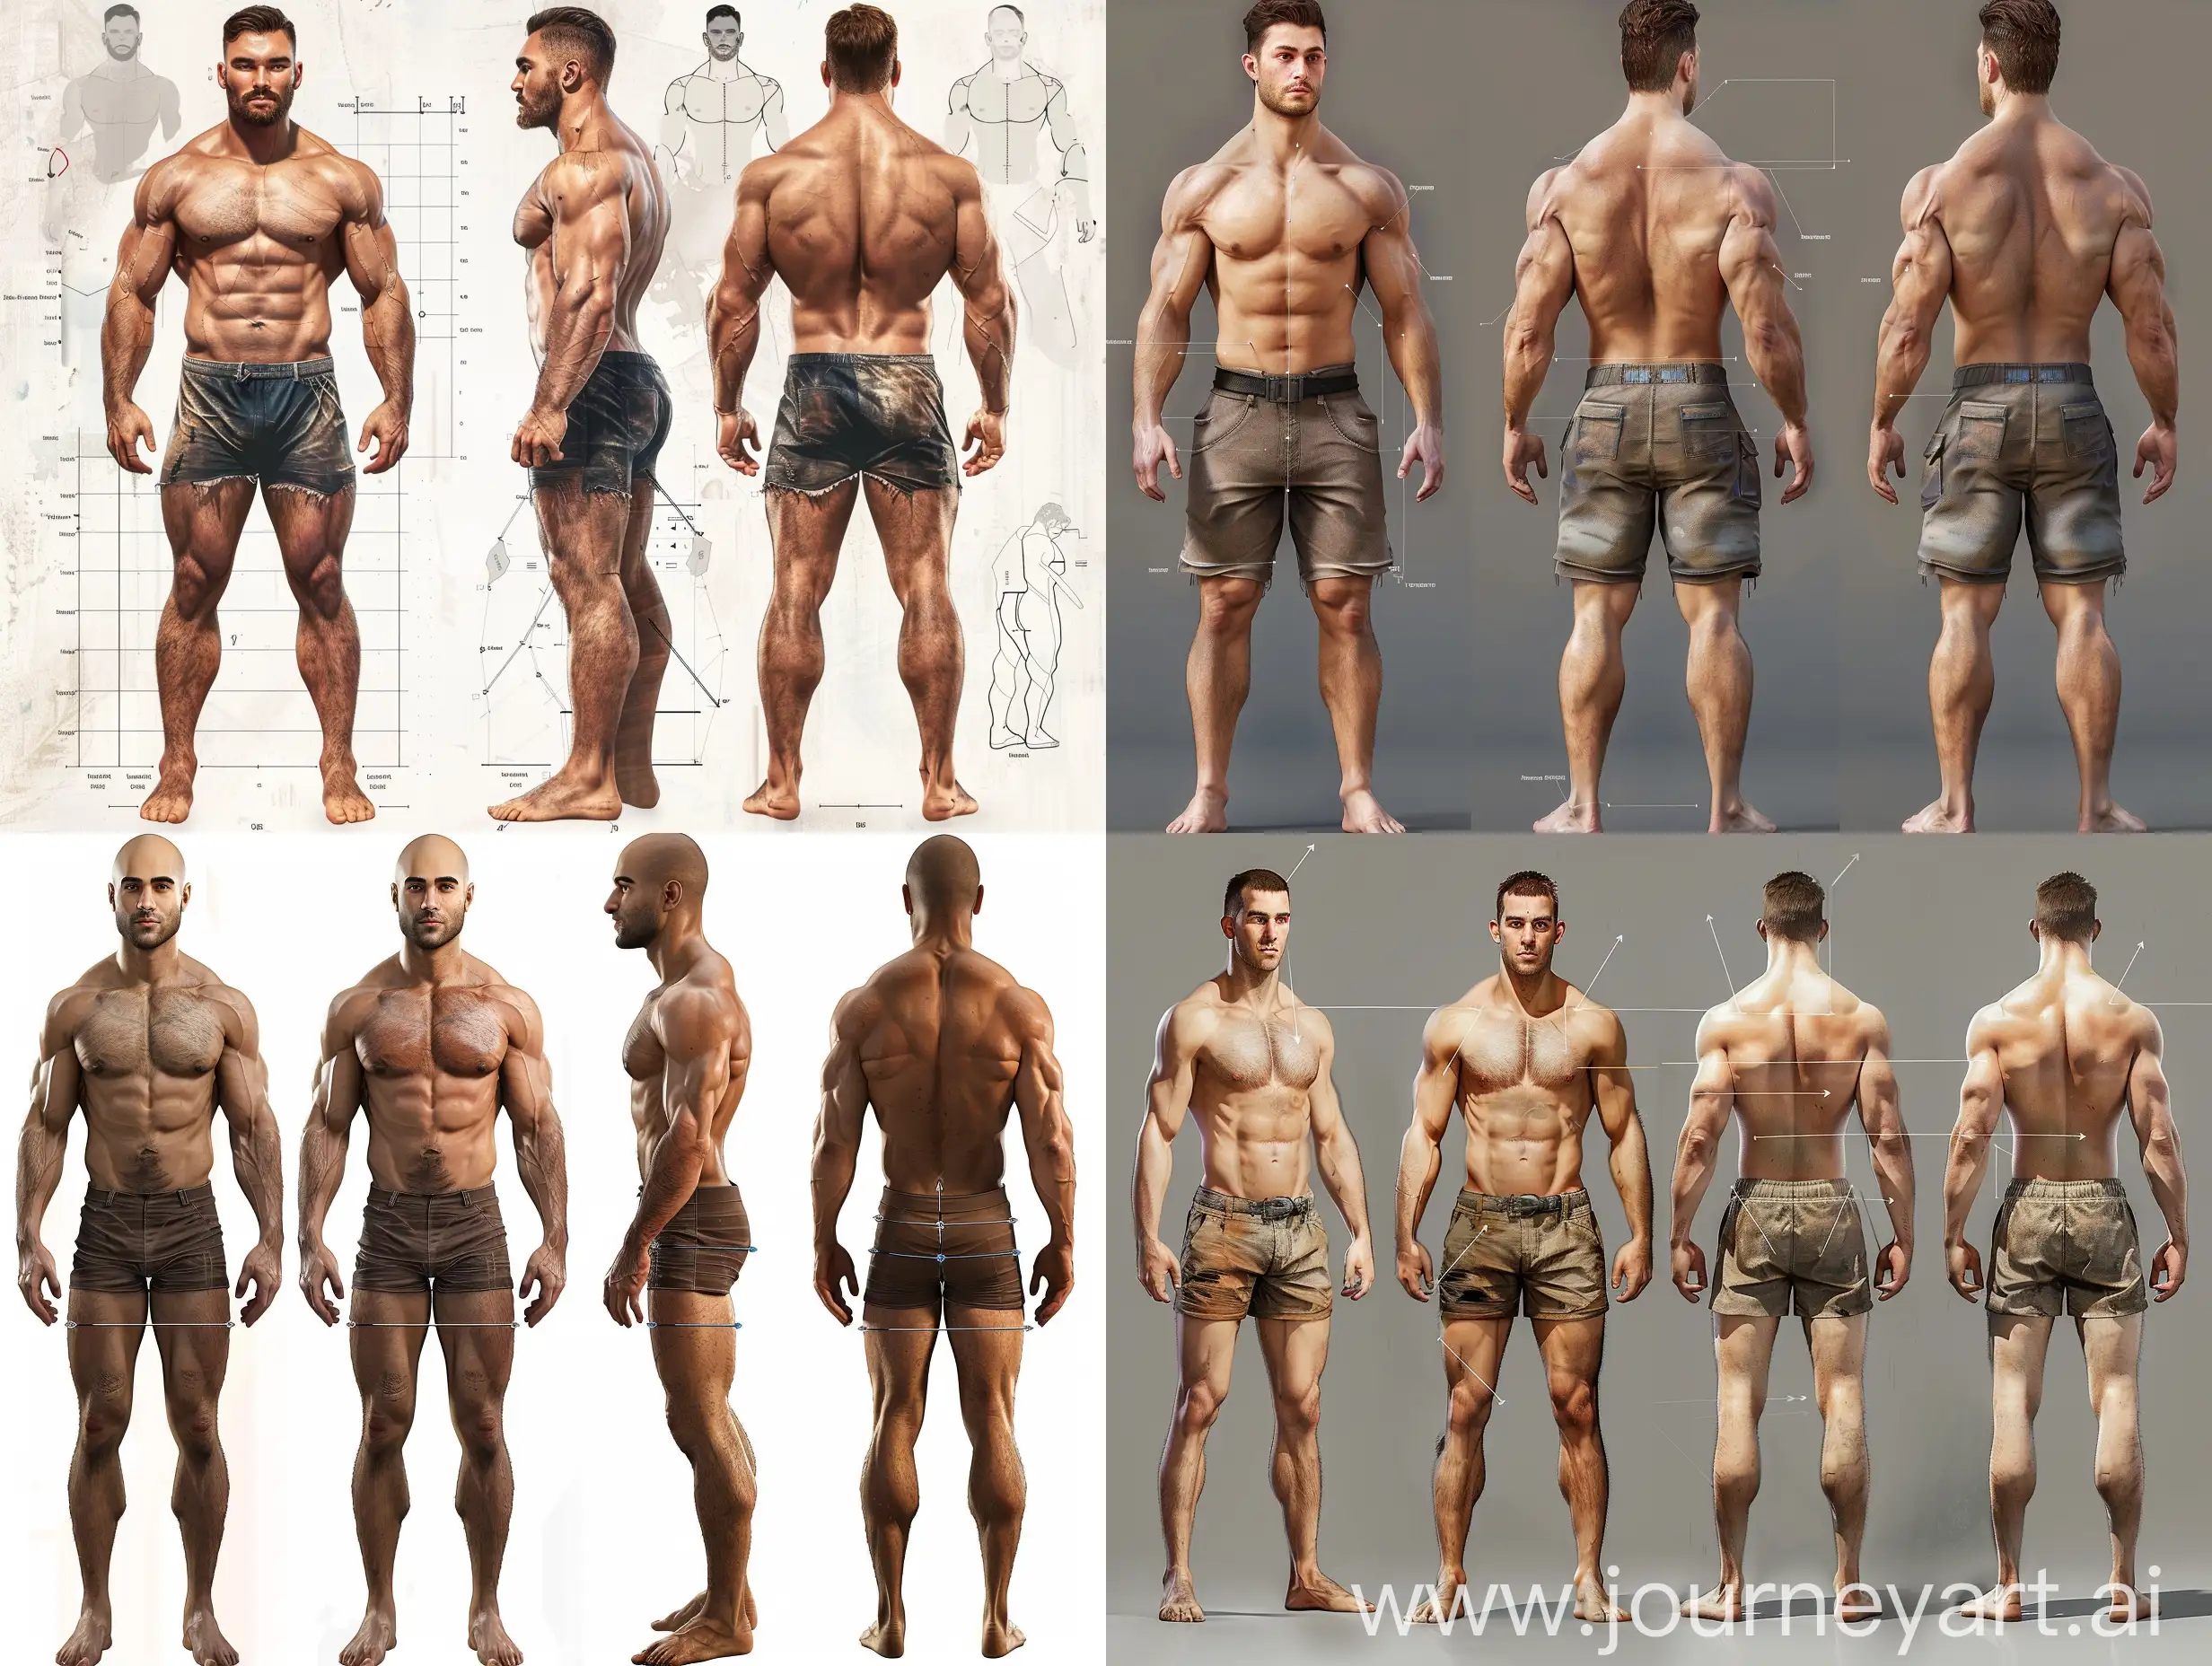 Realistic male character chart front back full body, and head close up shot, bl actor, image divided into 5 parts